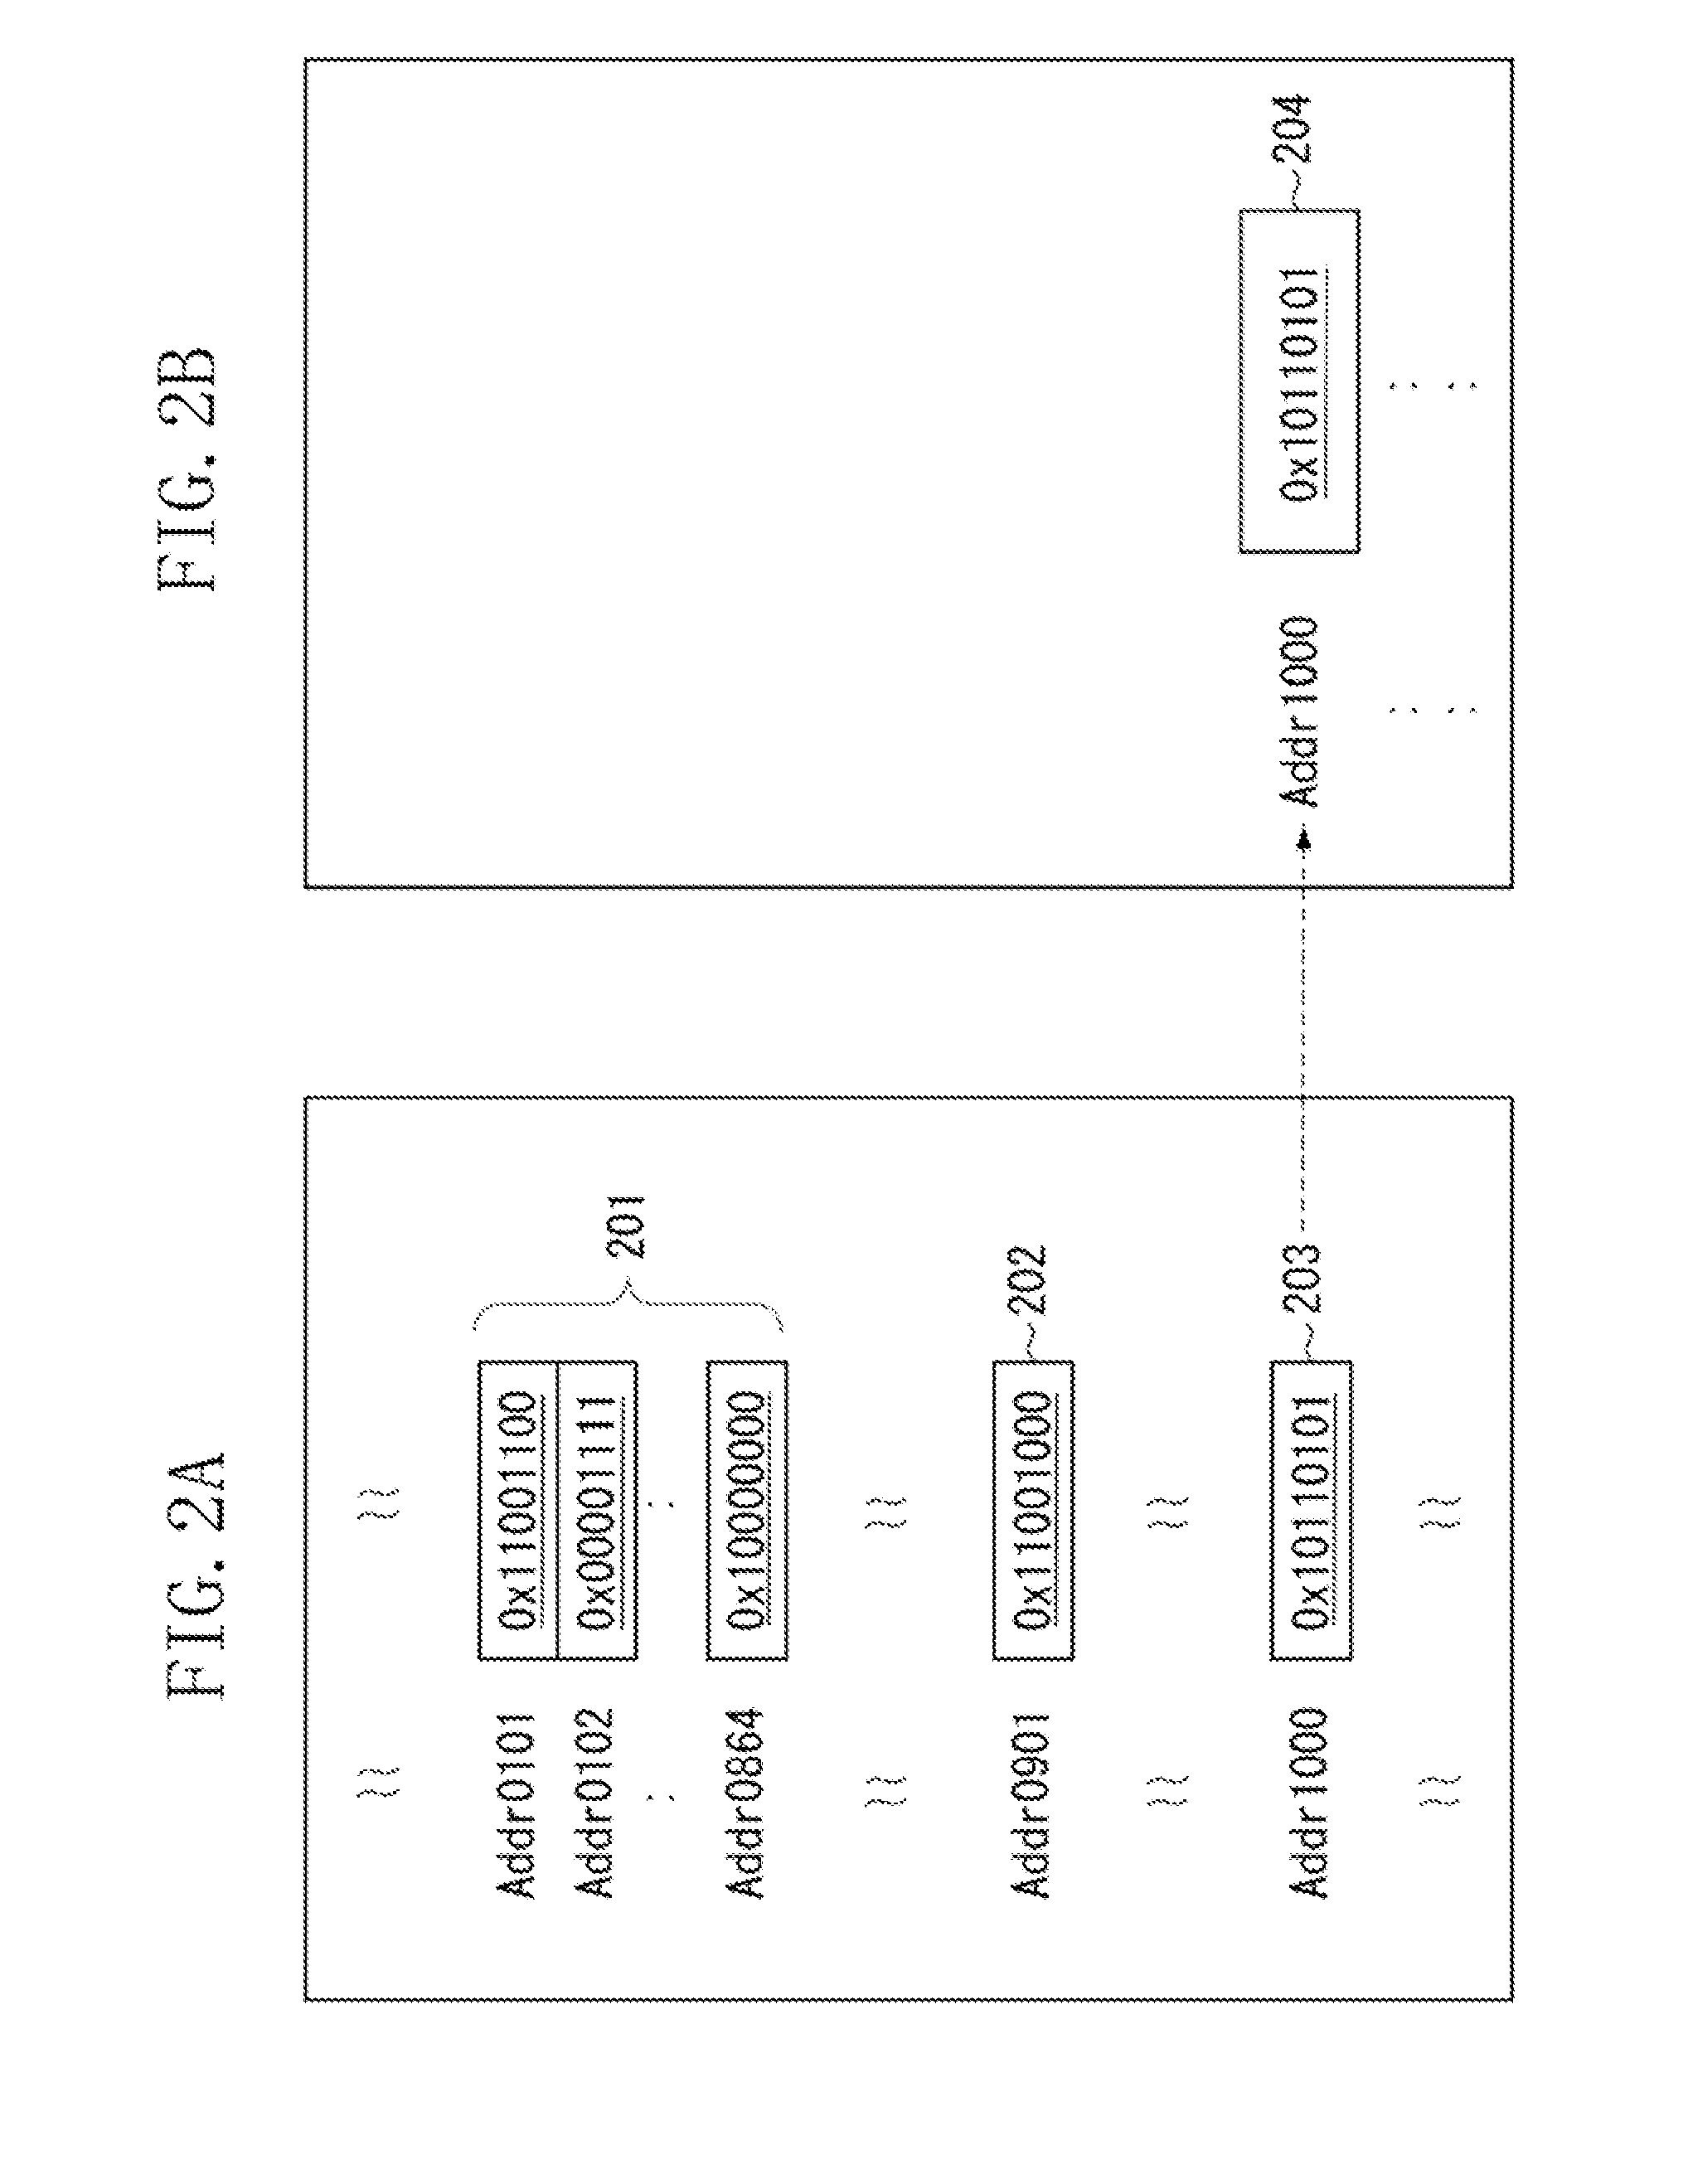 Data processing apparatus, data processing system, and method for controlling the same